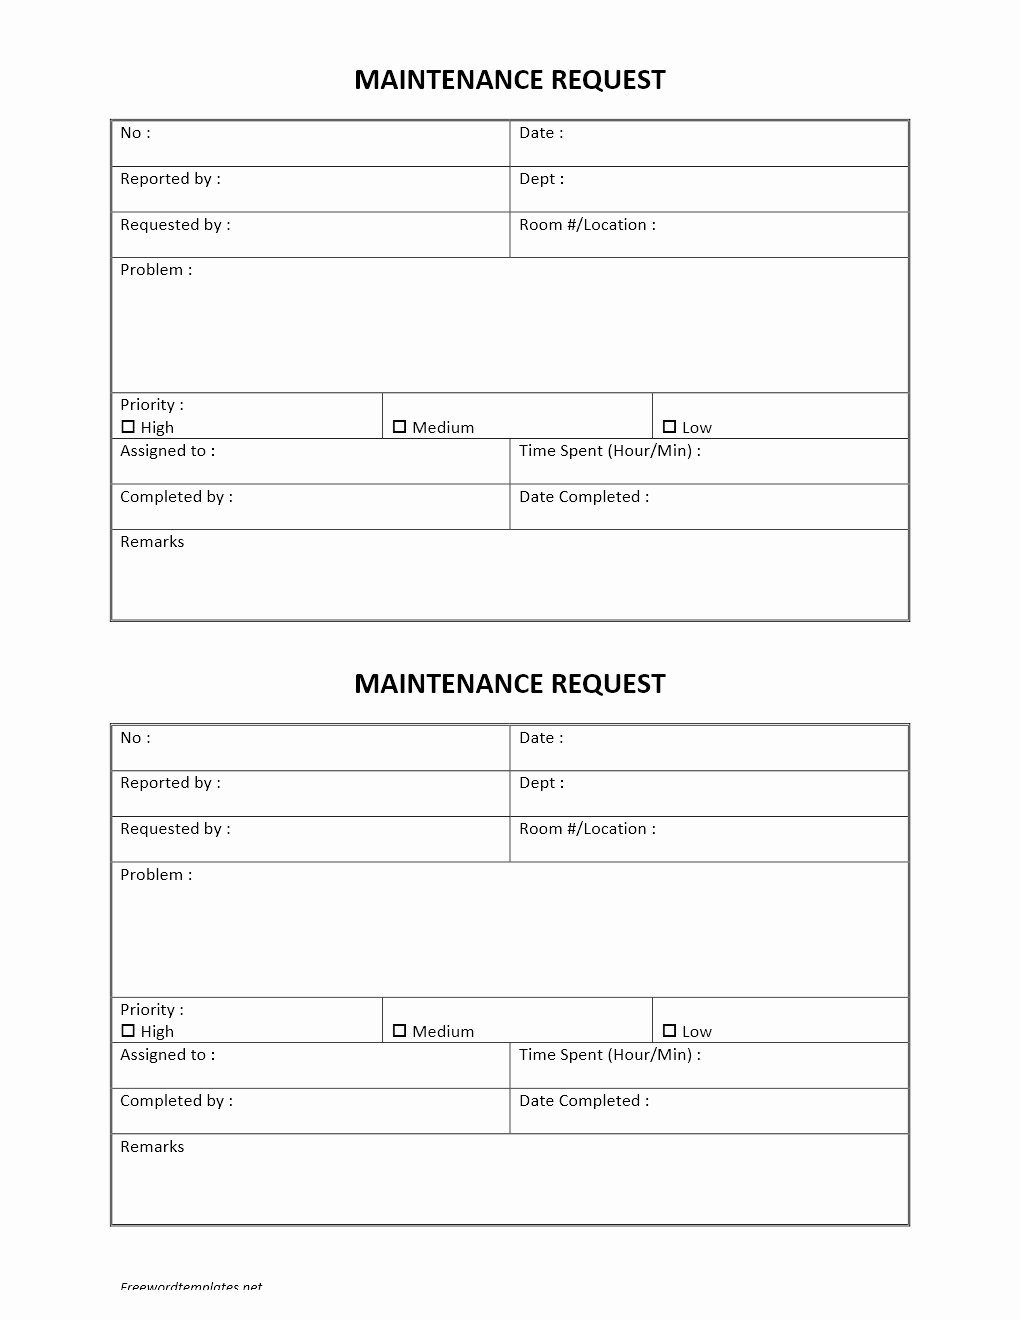 Maintenance Request form Template Best Of Hotel Maintenance Request form